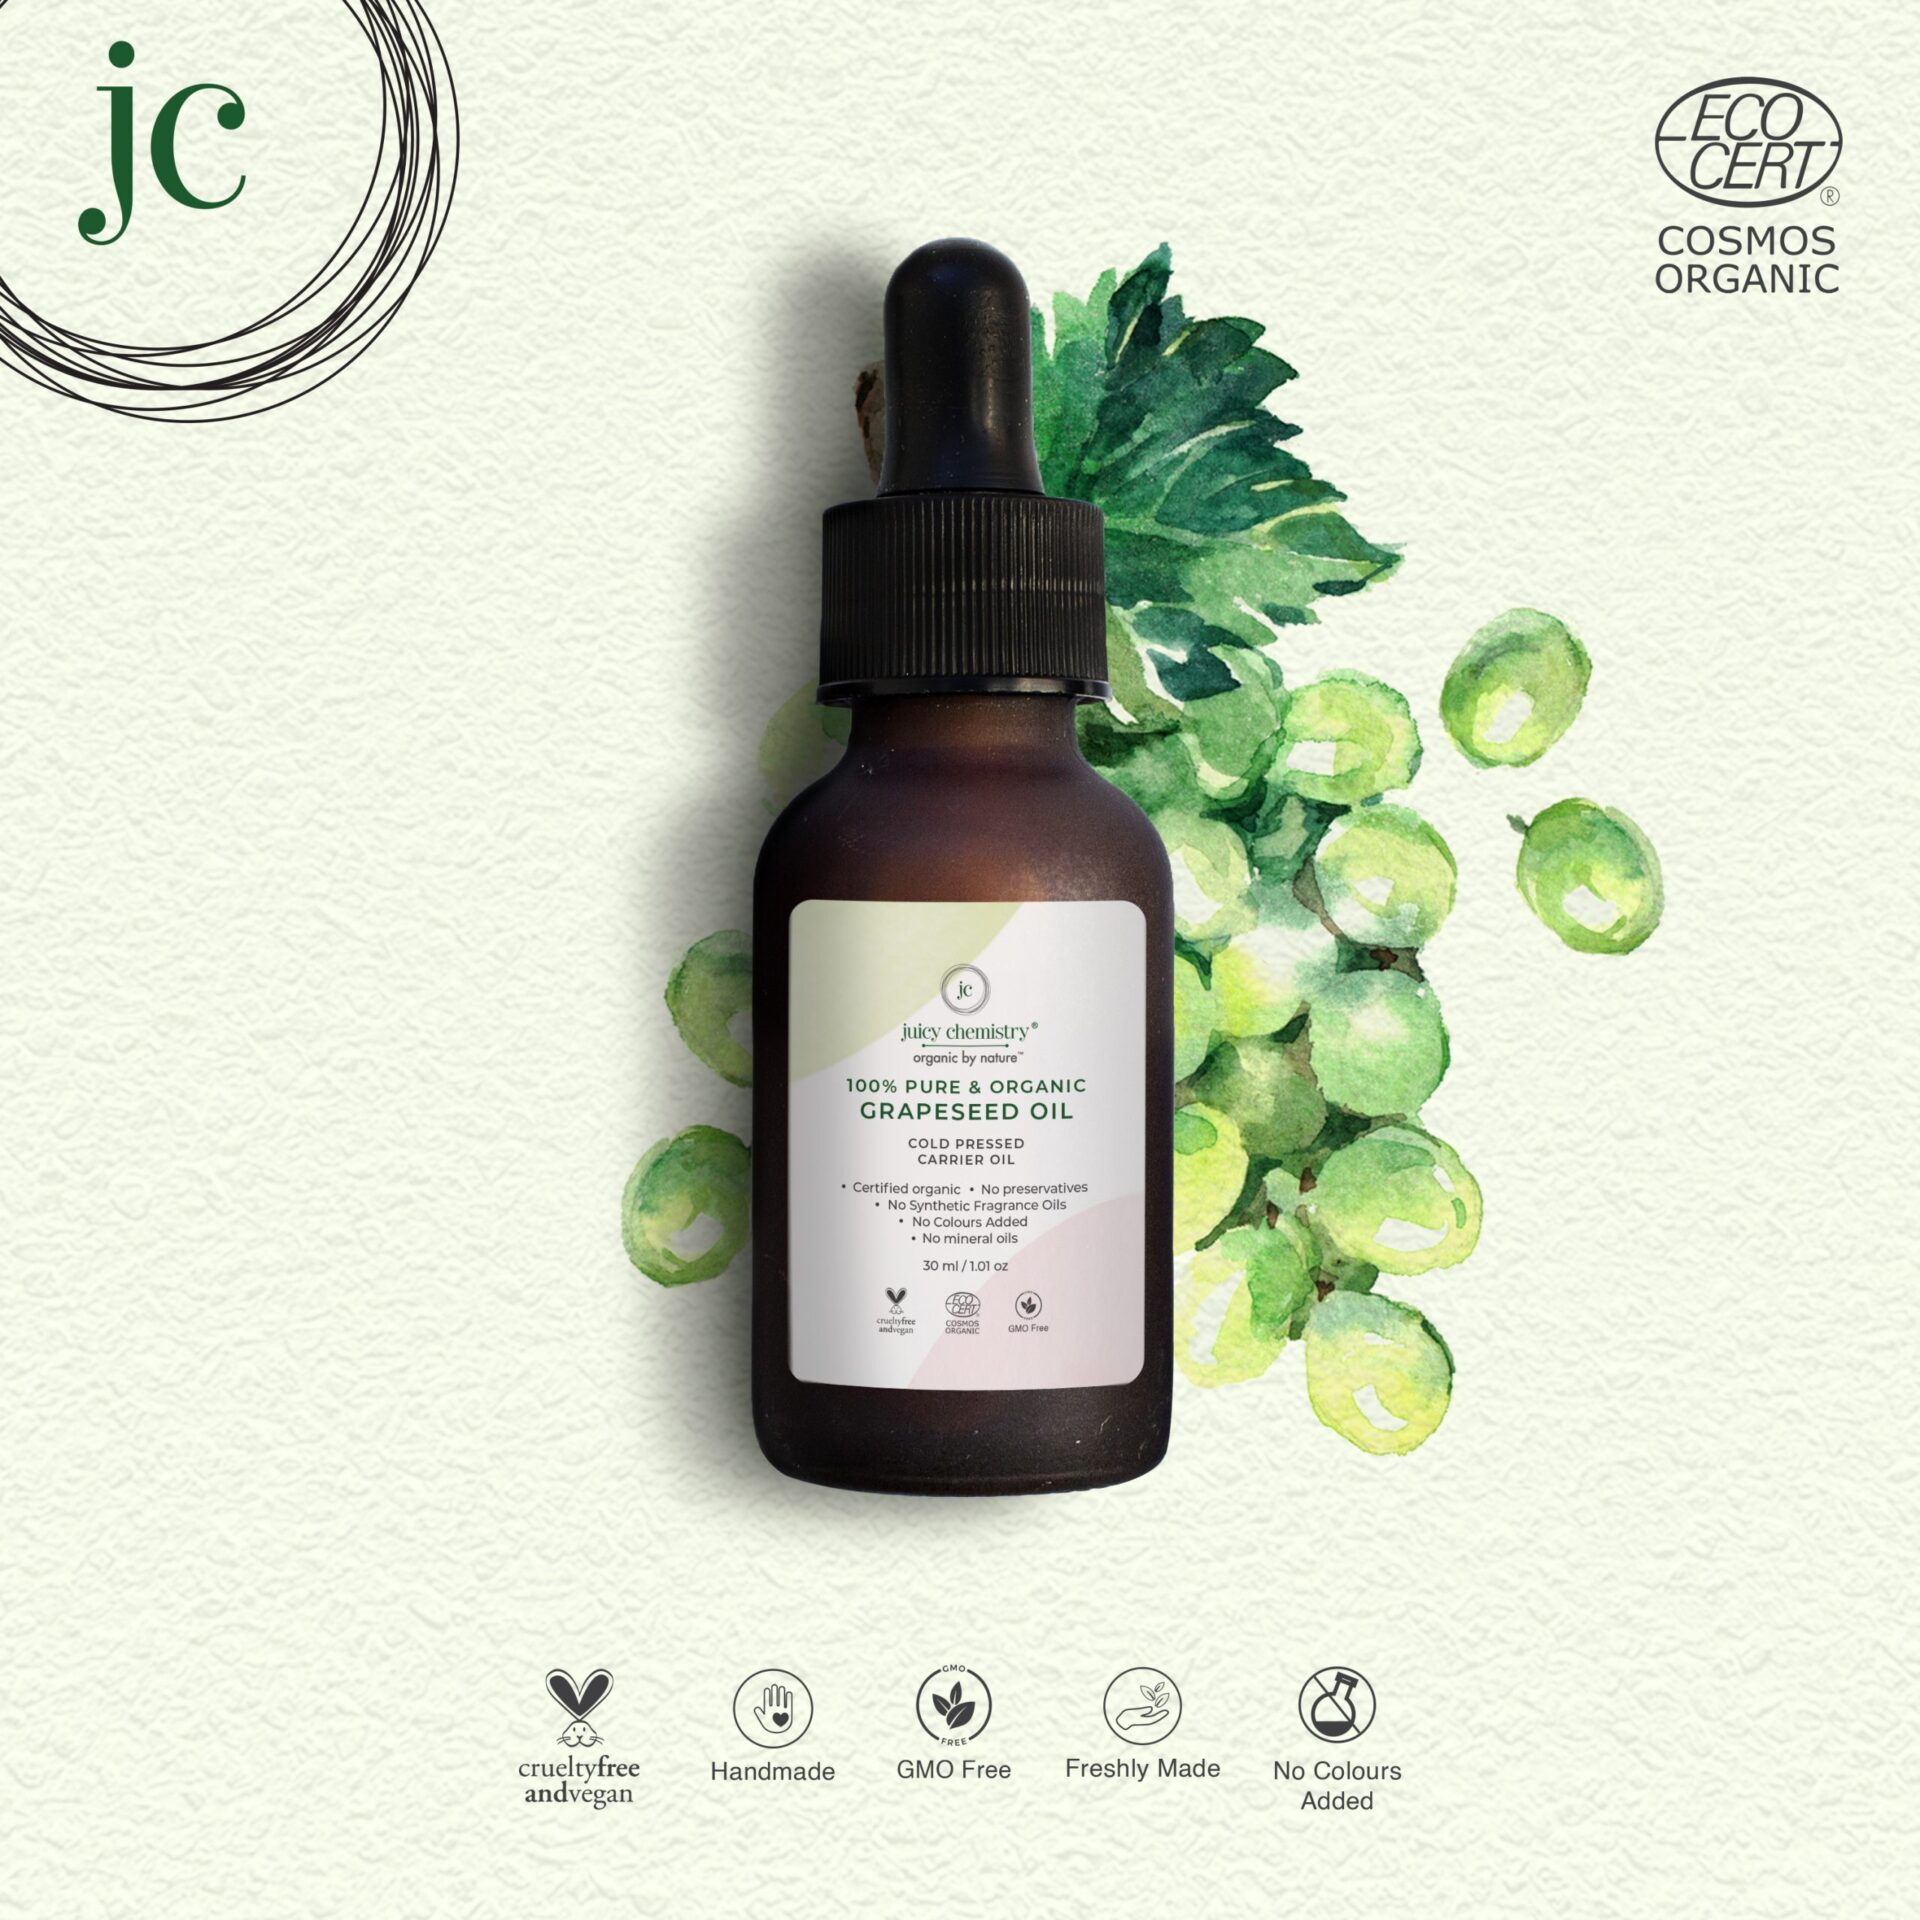 Juicy Chemistry Cold Pressed Grapeseed Oil - 30 ml